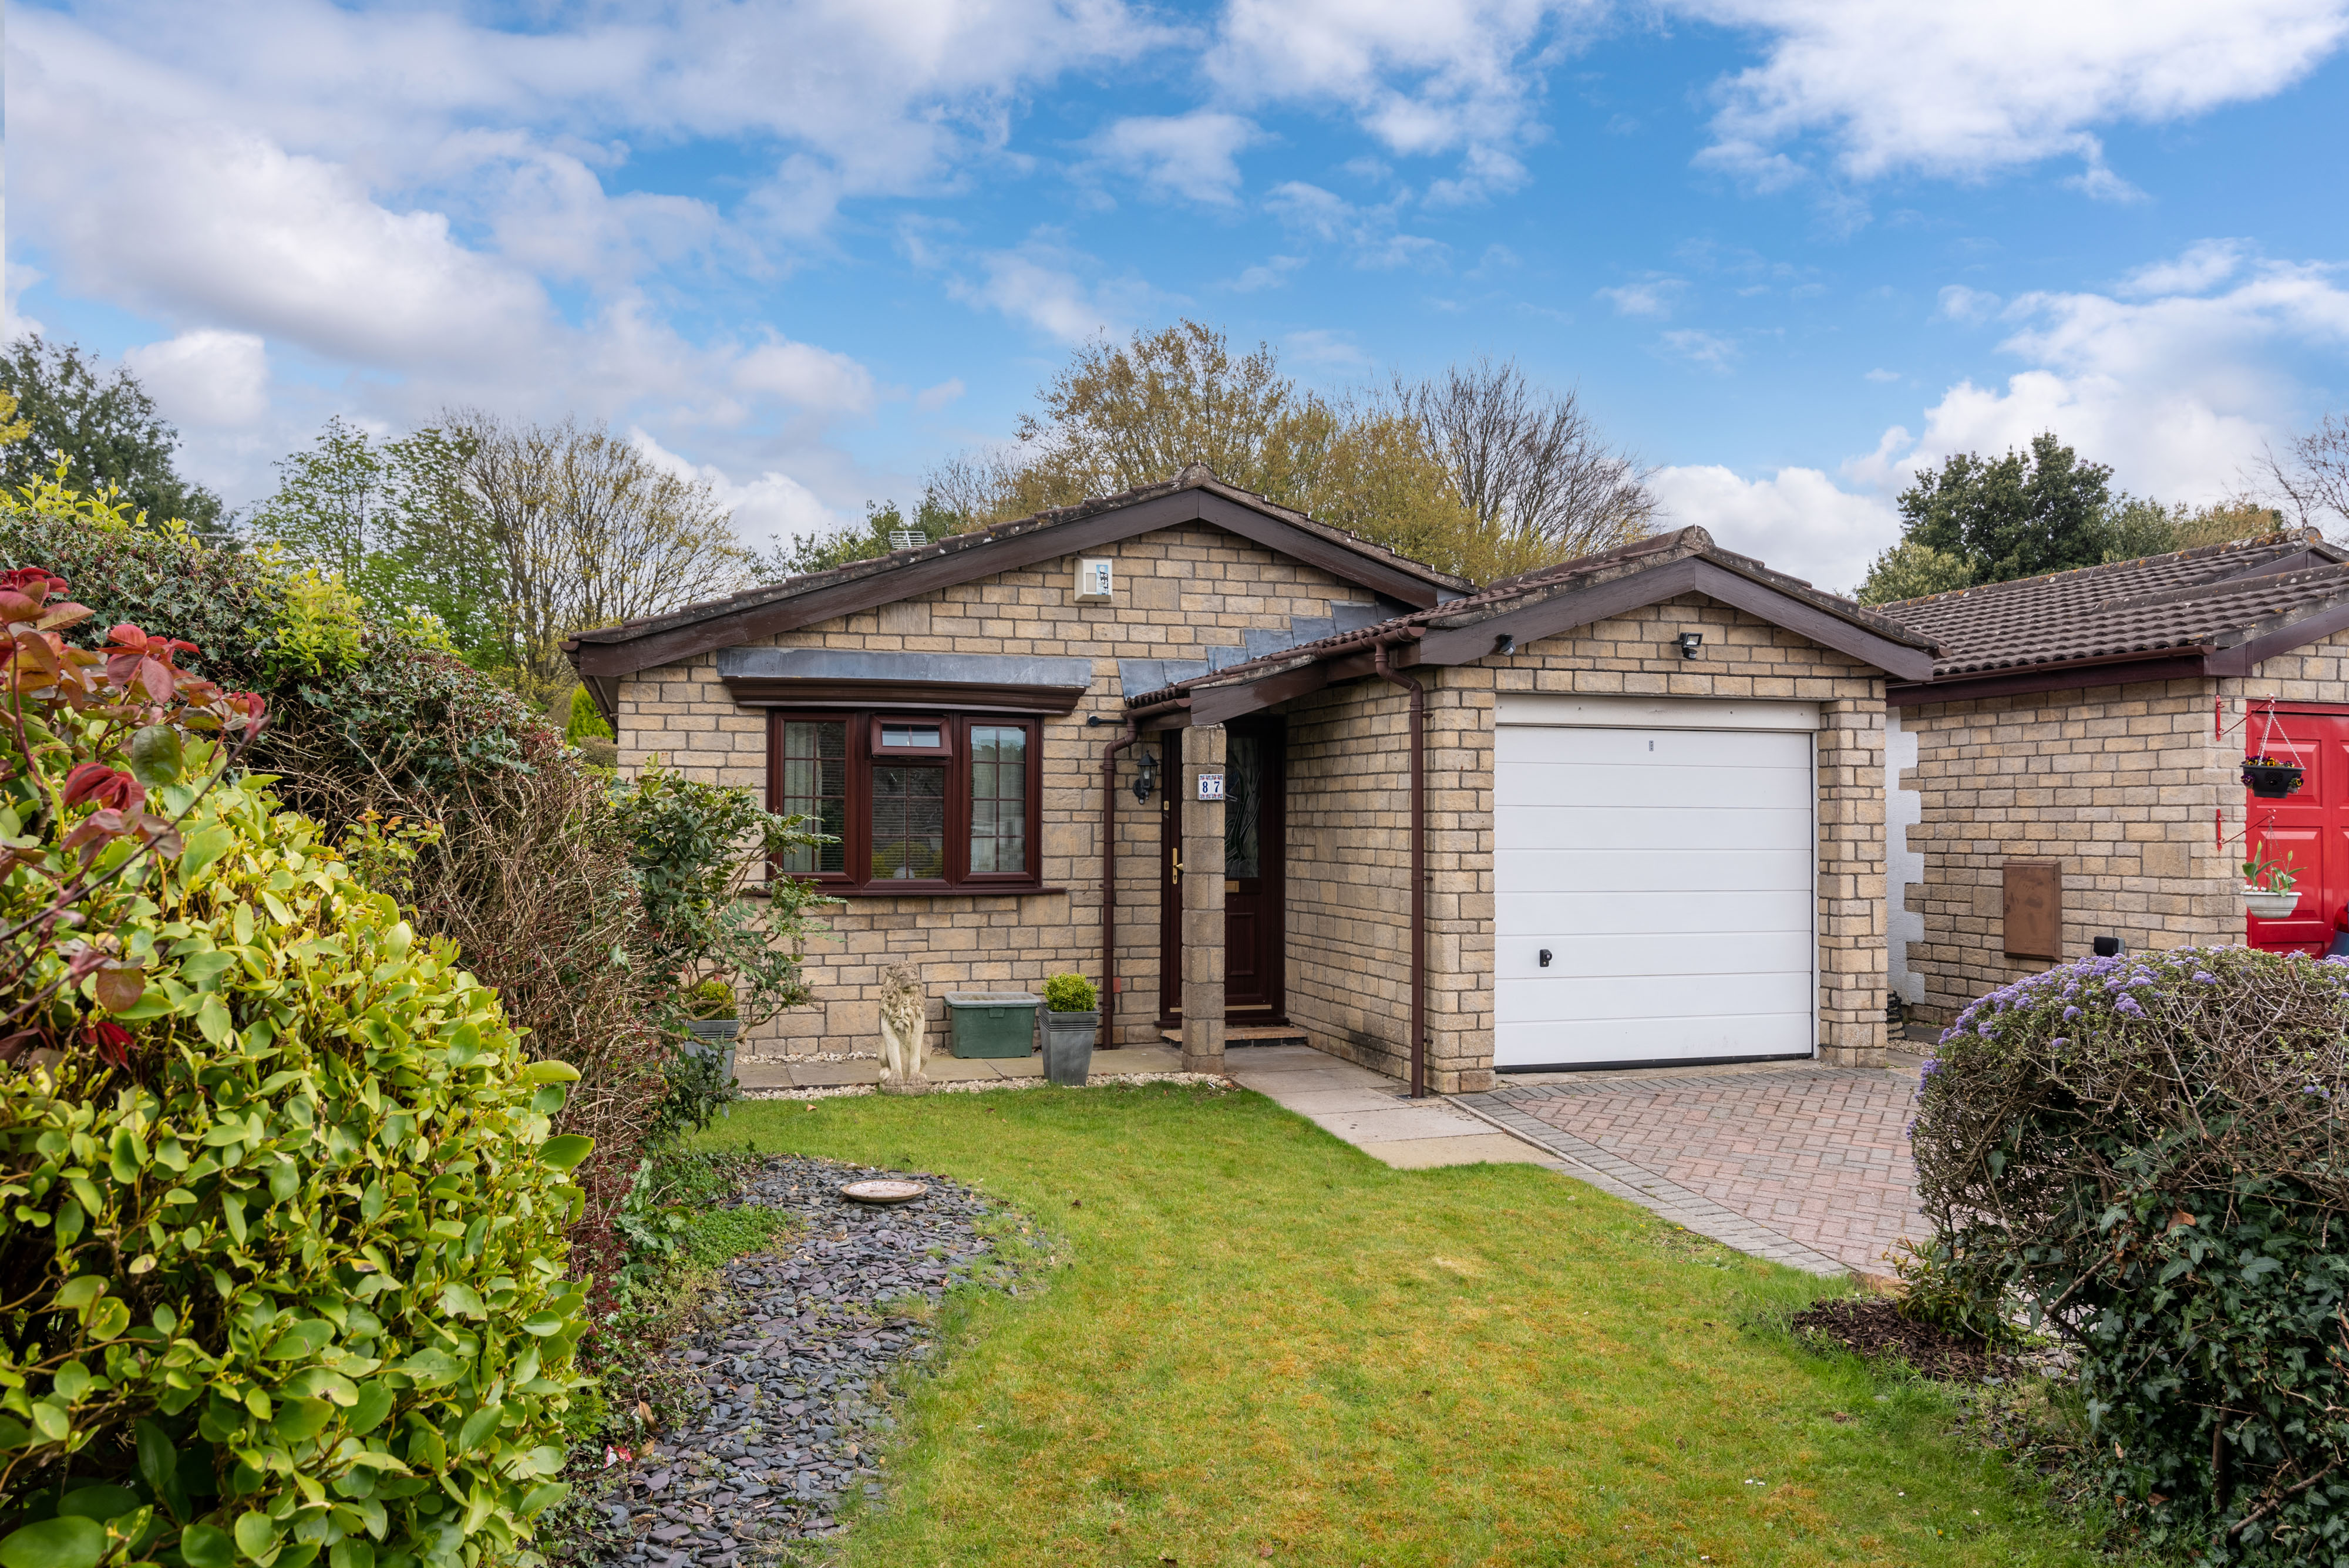 Old Church Road, Nailsea, North Somerset, BS48